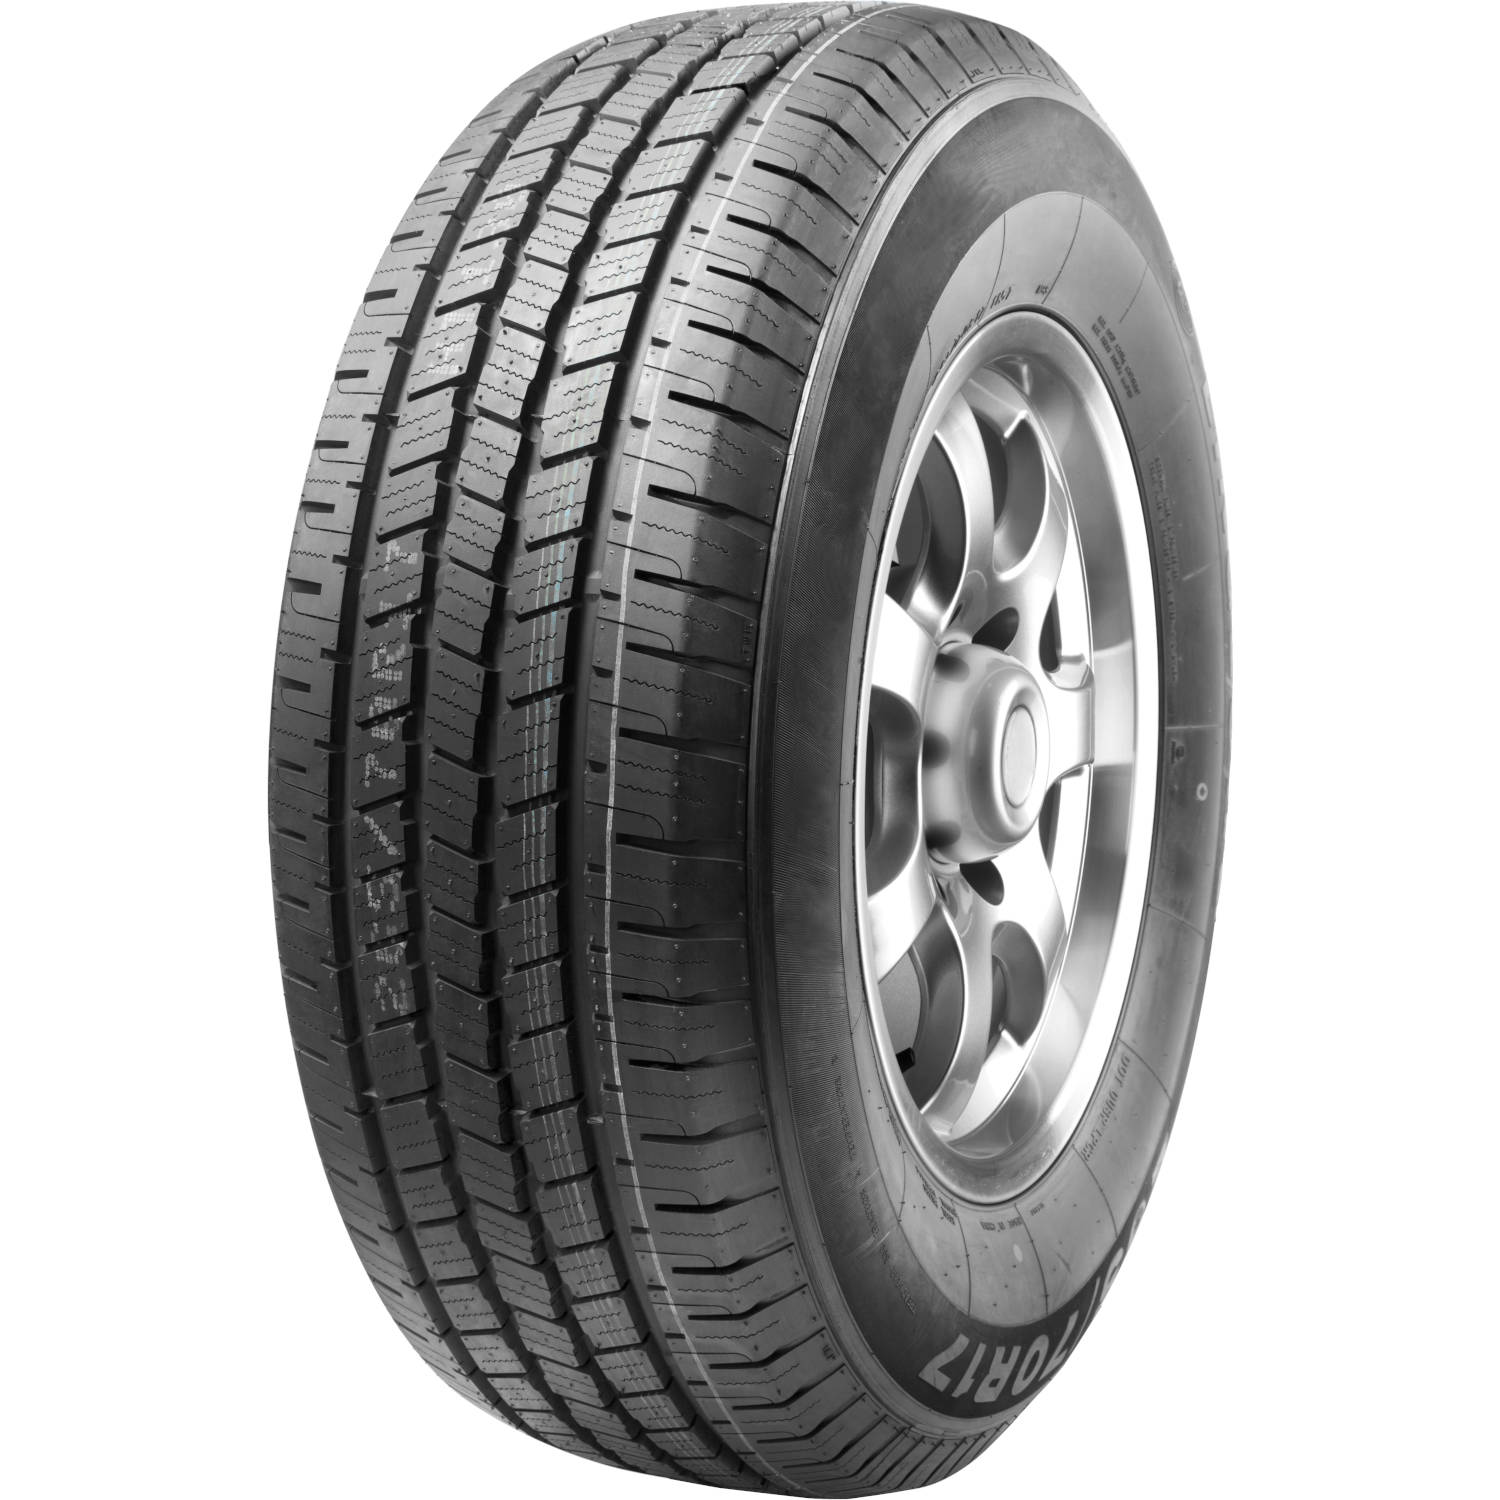 ROAD ONE CAVALRY H/T 265/70R17 (31.7X10.4R 17) Tires